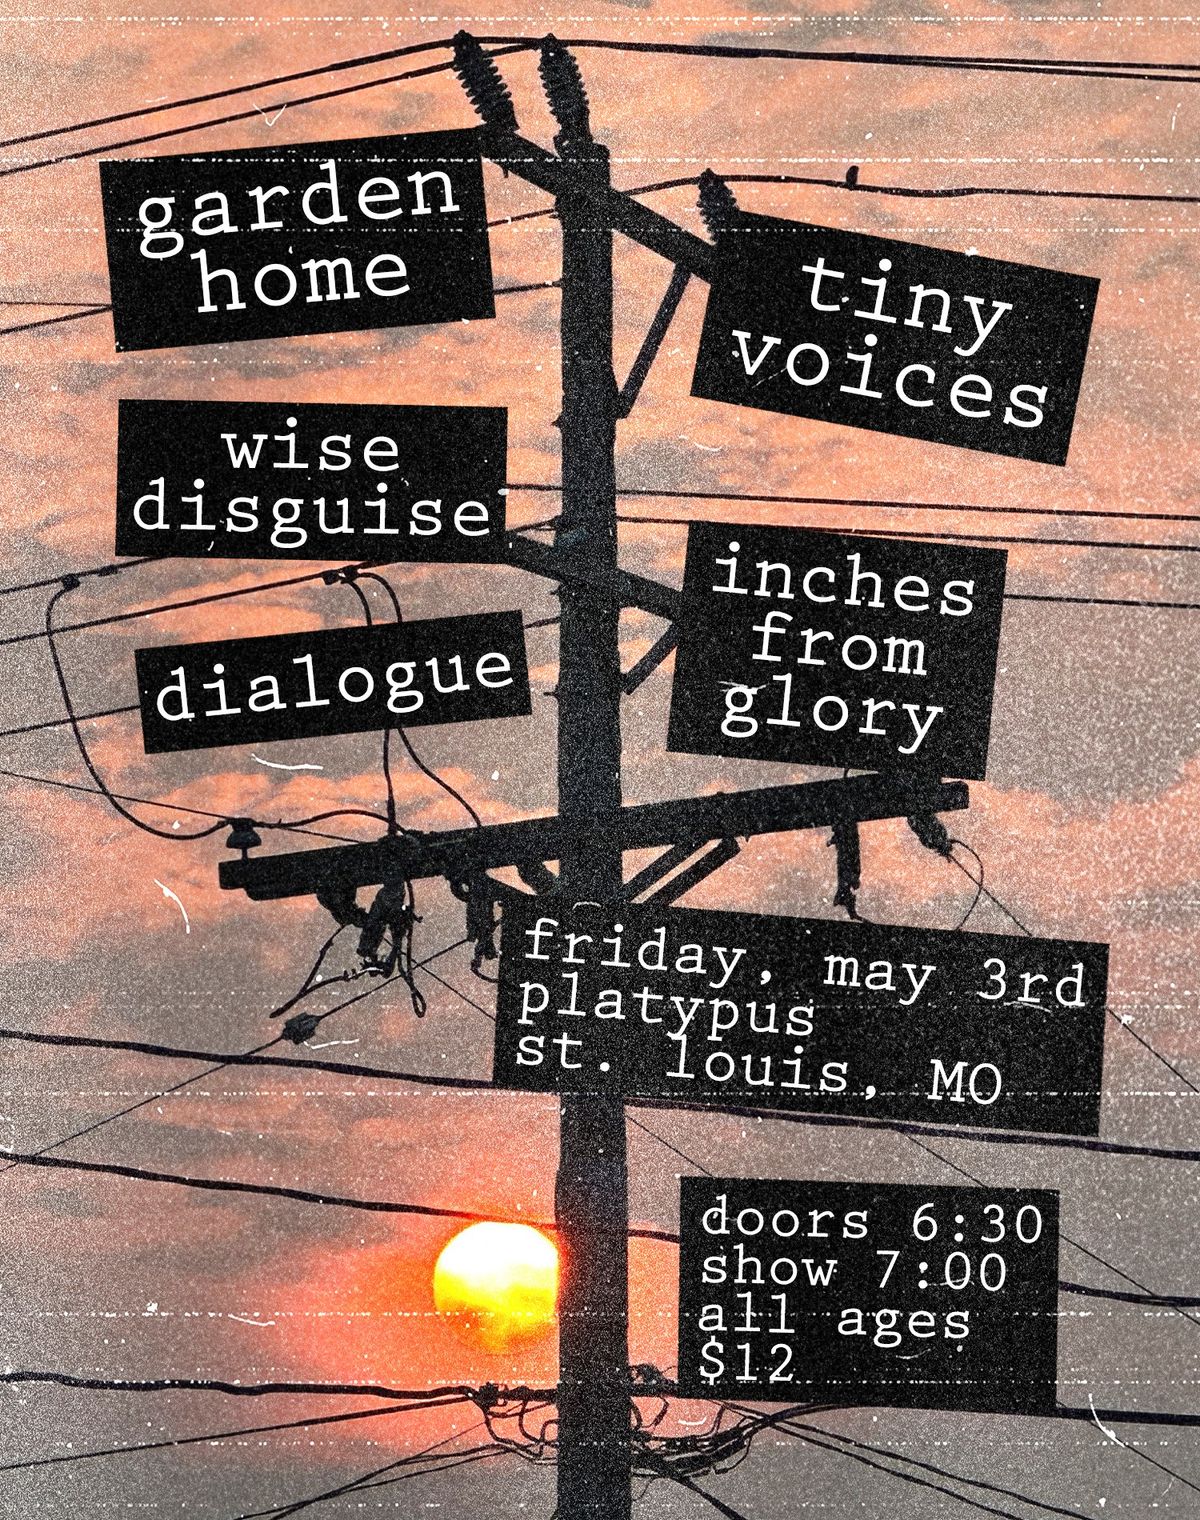 Garden Home (WI), Tiny Voices (WI), Wise Disguise, Dialogue + Inches from Glory at Platypus